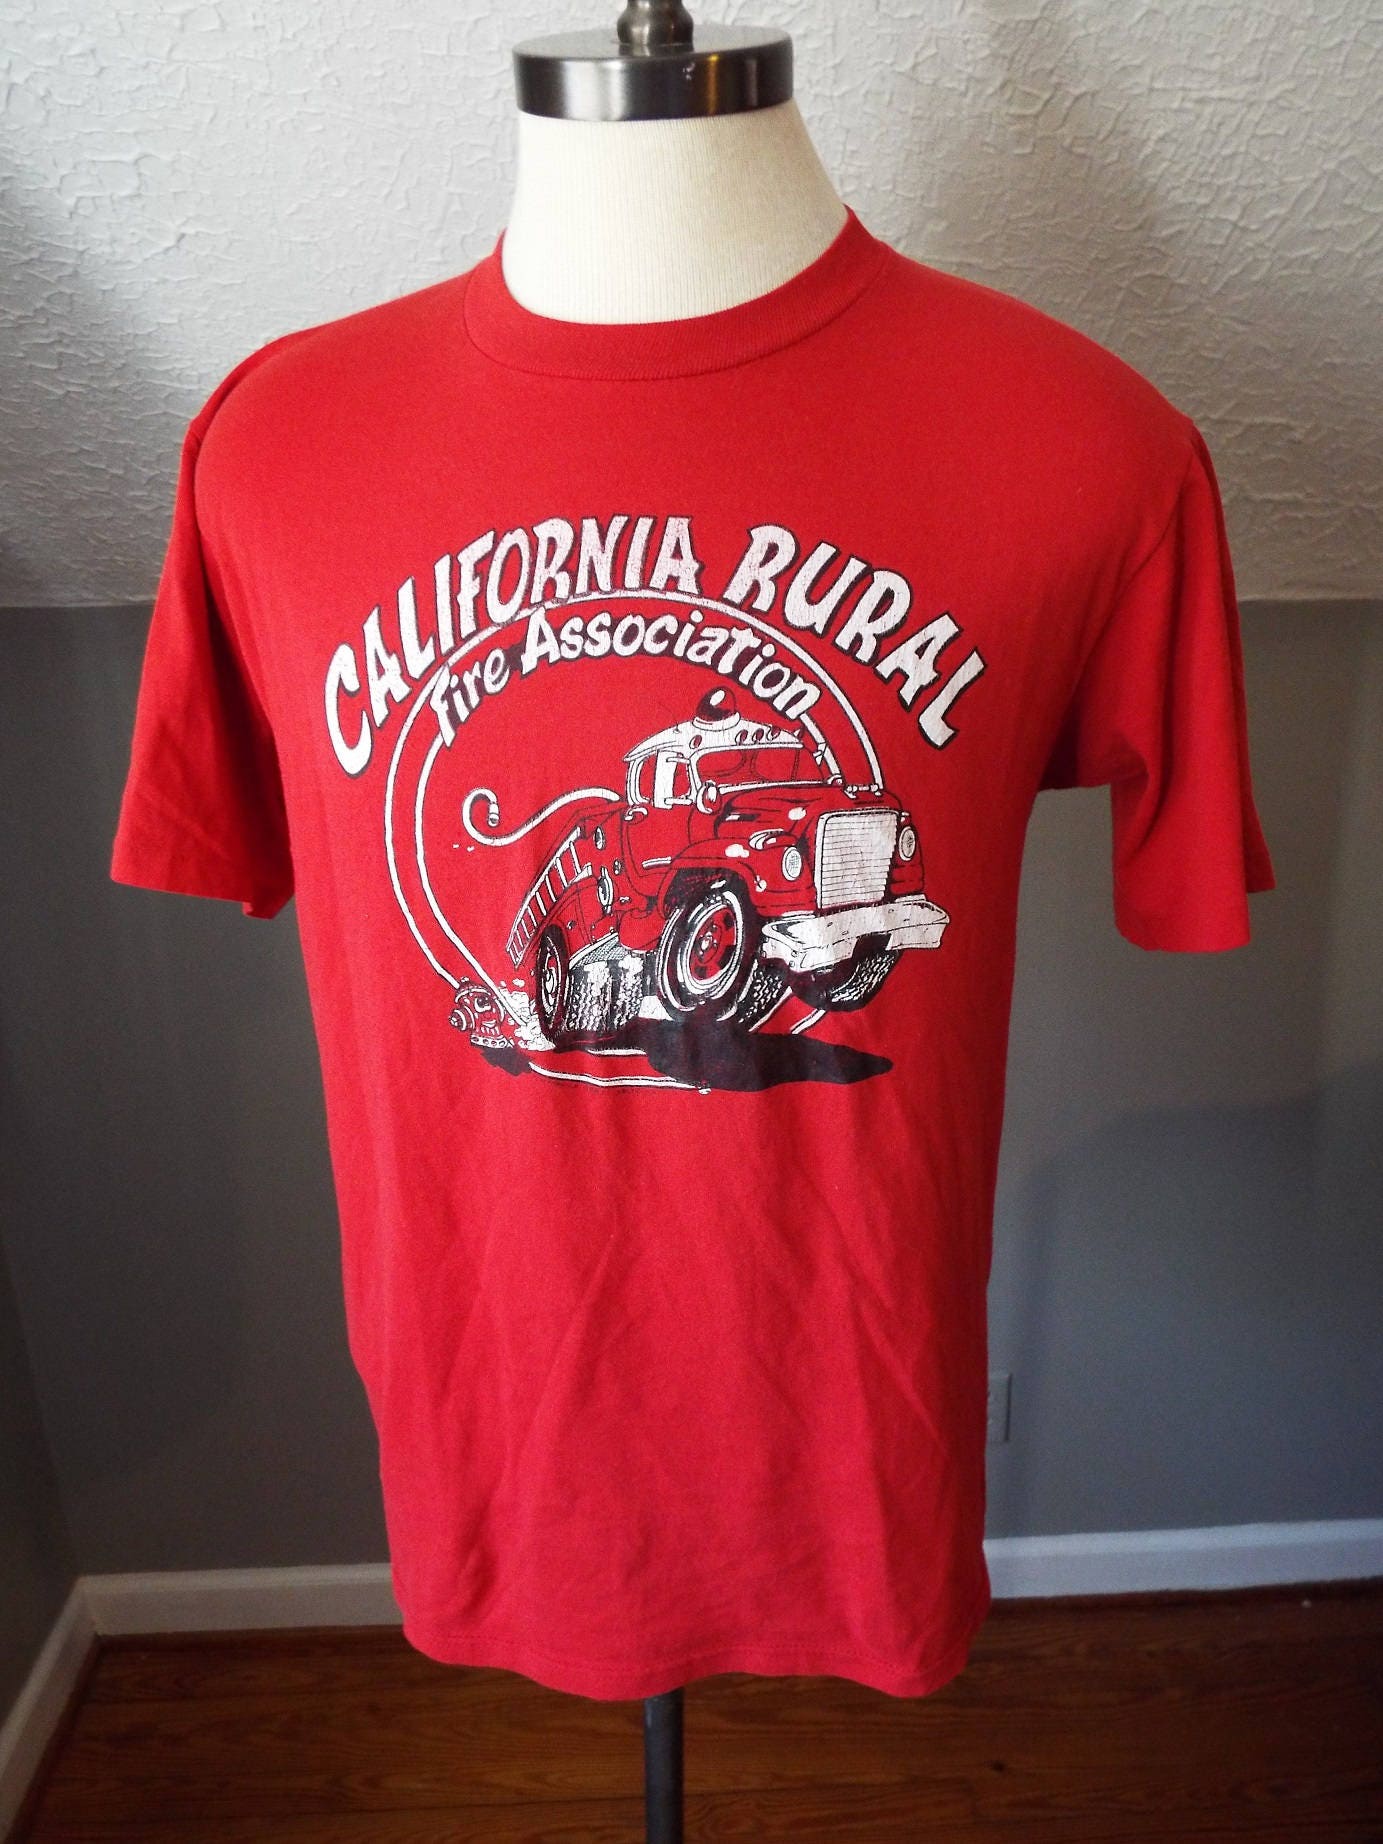 Vintage T-Shirt from the California Rural Fire Association